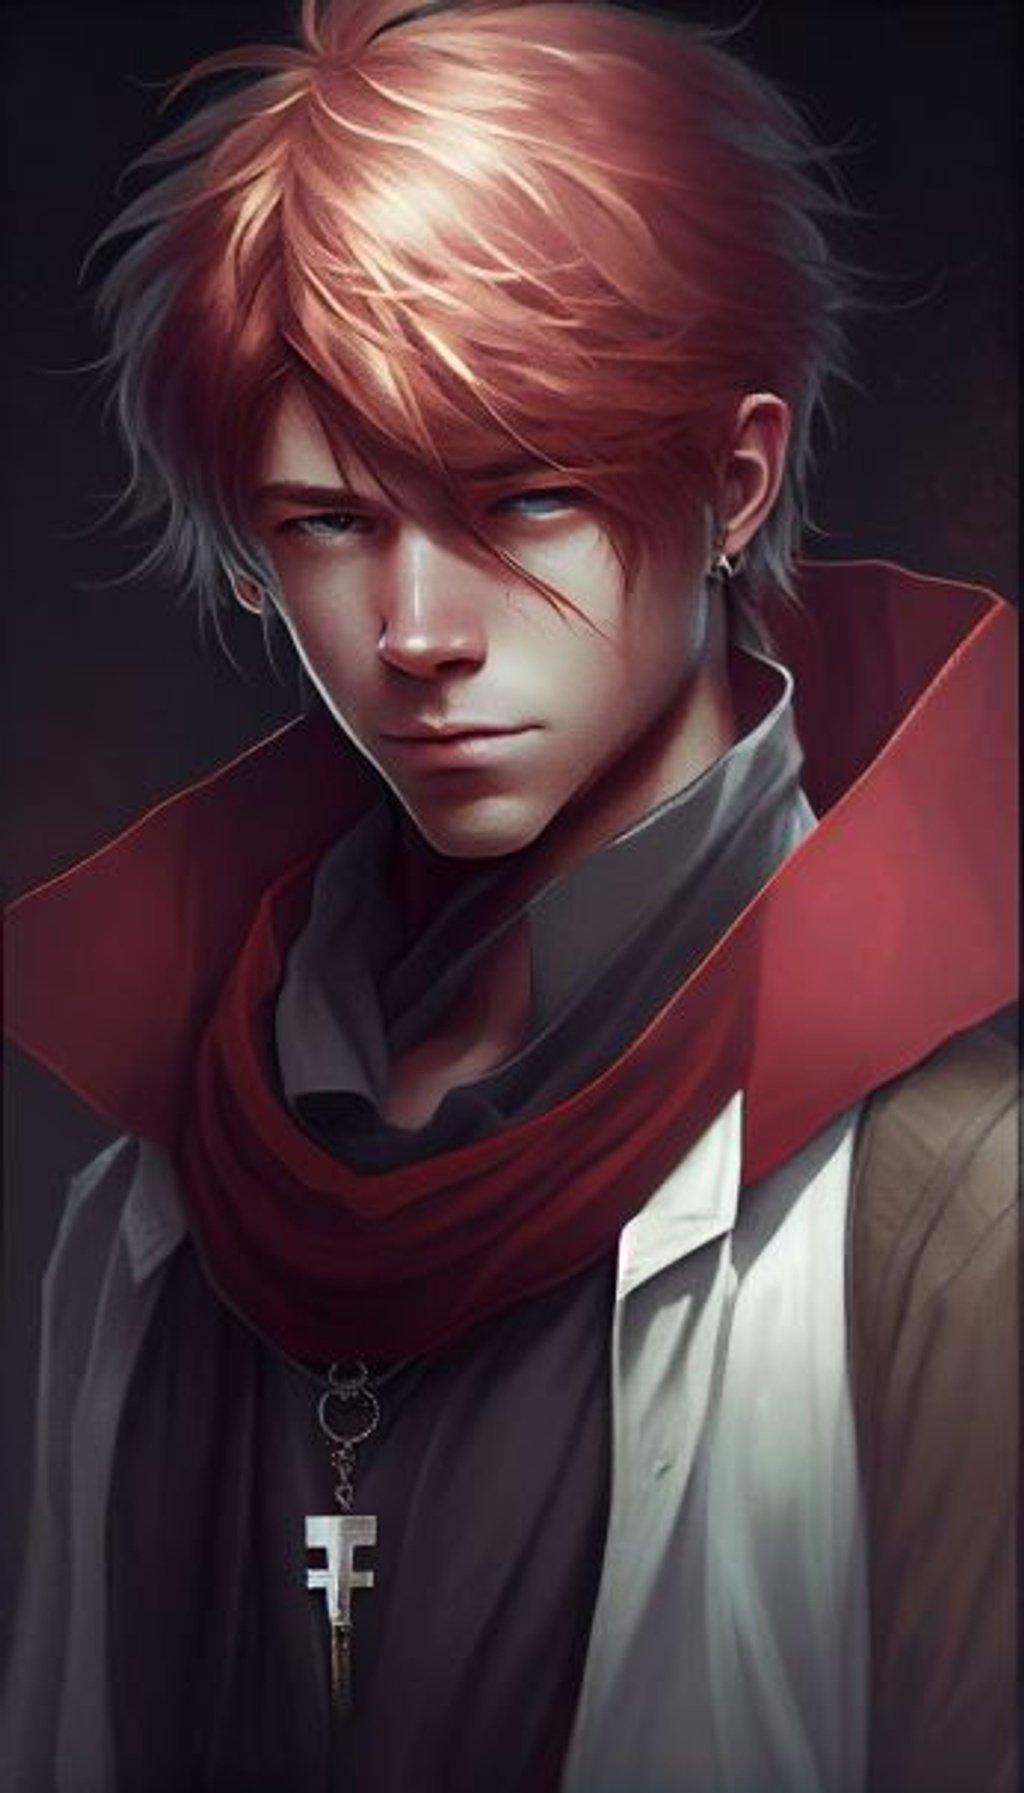 Prompt: a young man :: 5 with short, spiky orange hair :: 4 and piercing blue eyes :: 4. He wears a sleeveless silver and grey tunic :: 4 with intricate red embroidery, and a matching pair of silver pants :: 3. A long red scarf :: 3 is draped around his neck and falls to his side. He has a confident smirk :: 3 on his face, and he stands with one hand on his hip :: 3